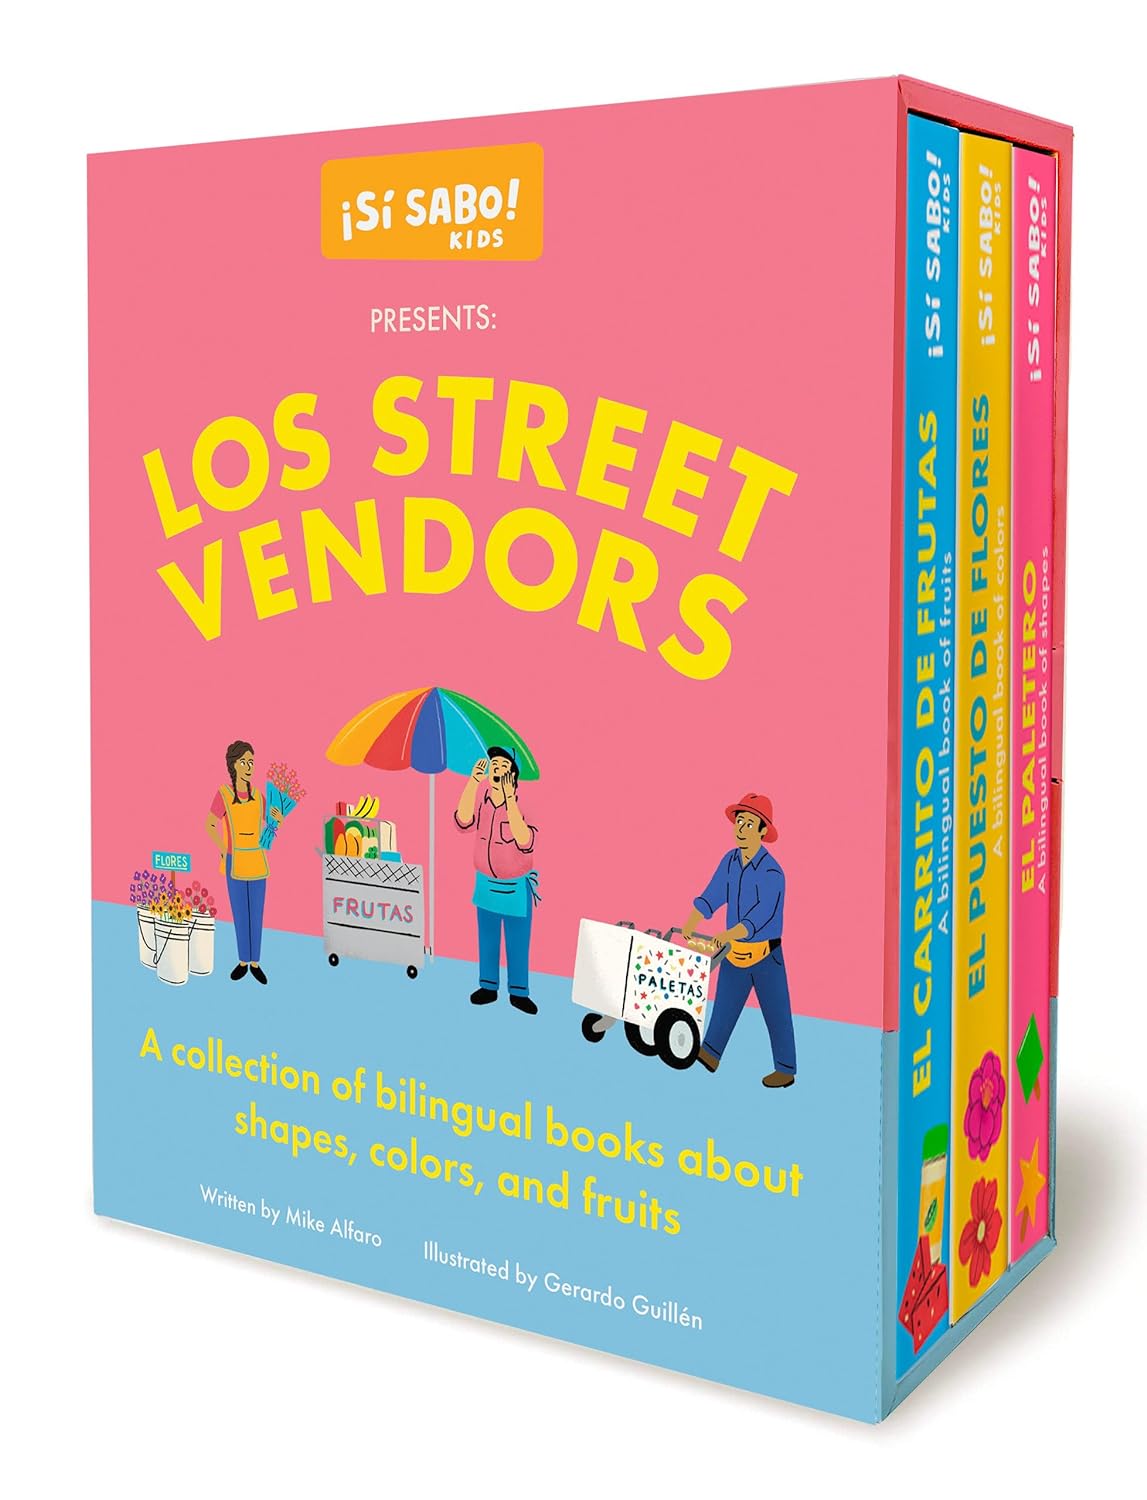 Los Street Vendors: A Collection of Bilingual Books about Shapes, Colors, and Fruits Inspired by Latin American Culture (Sí Sabo Kids) Paperback